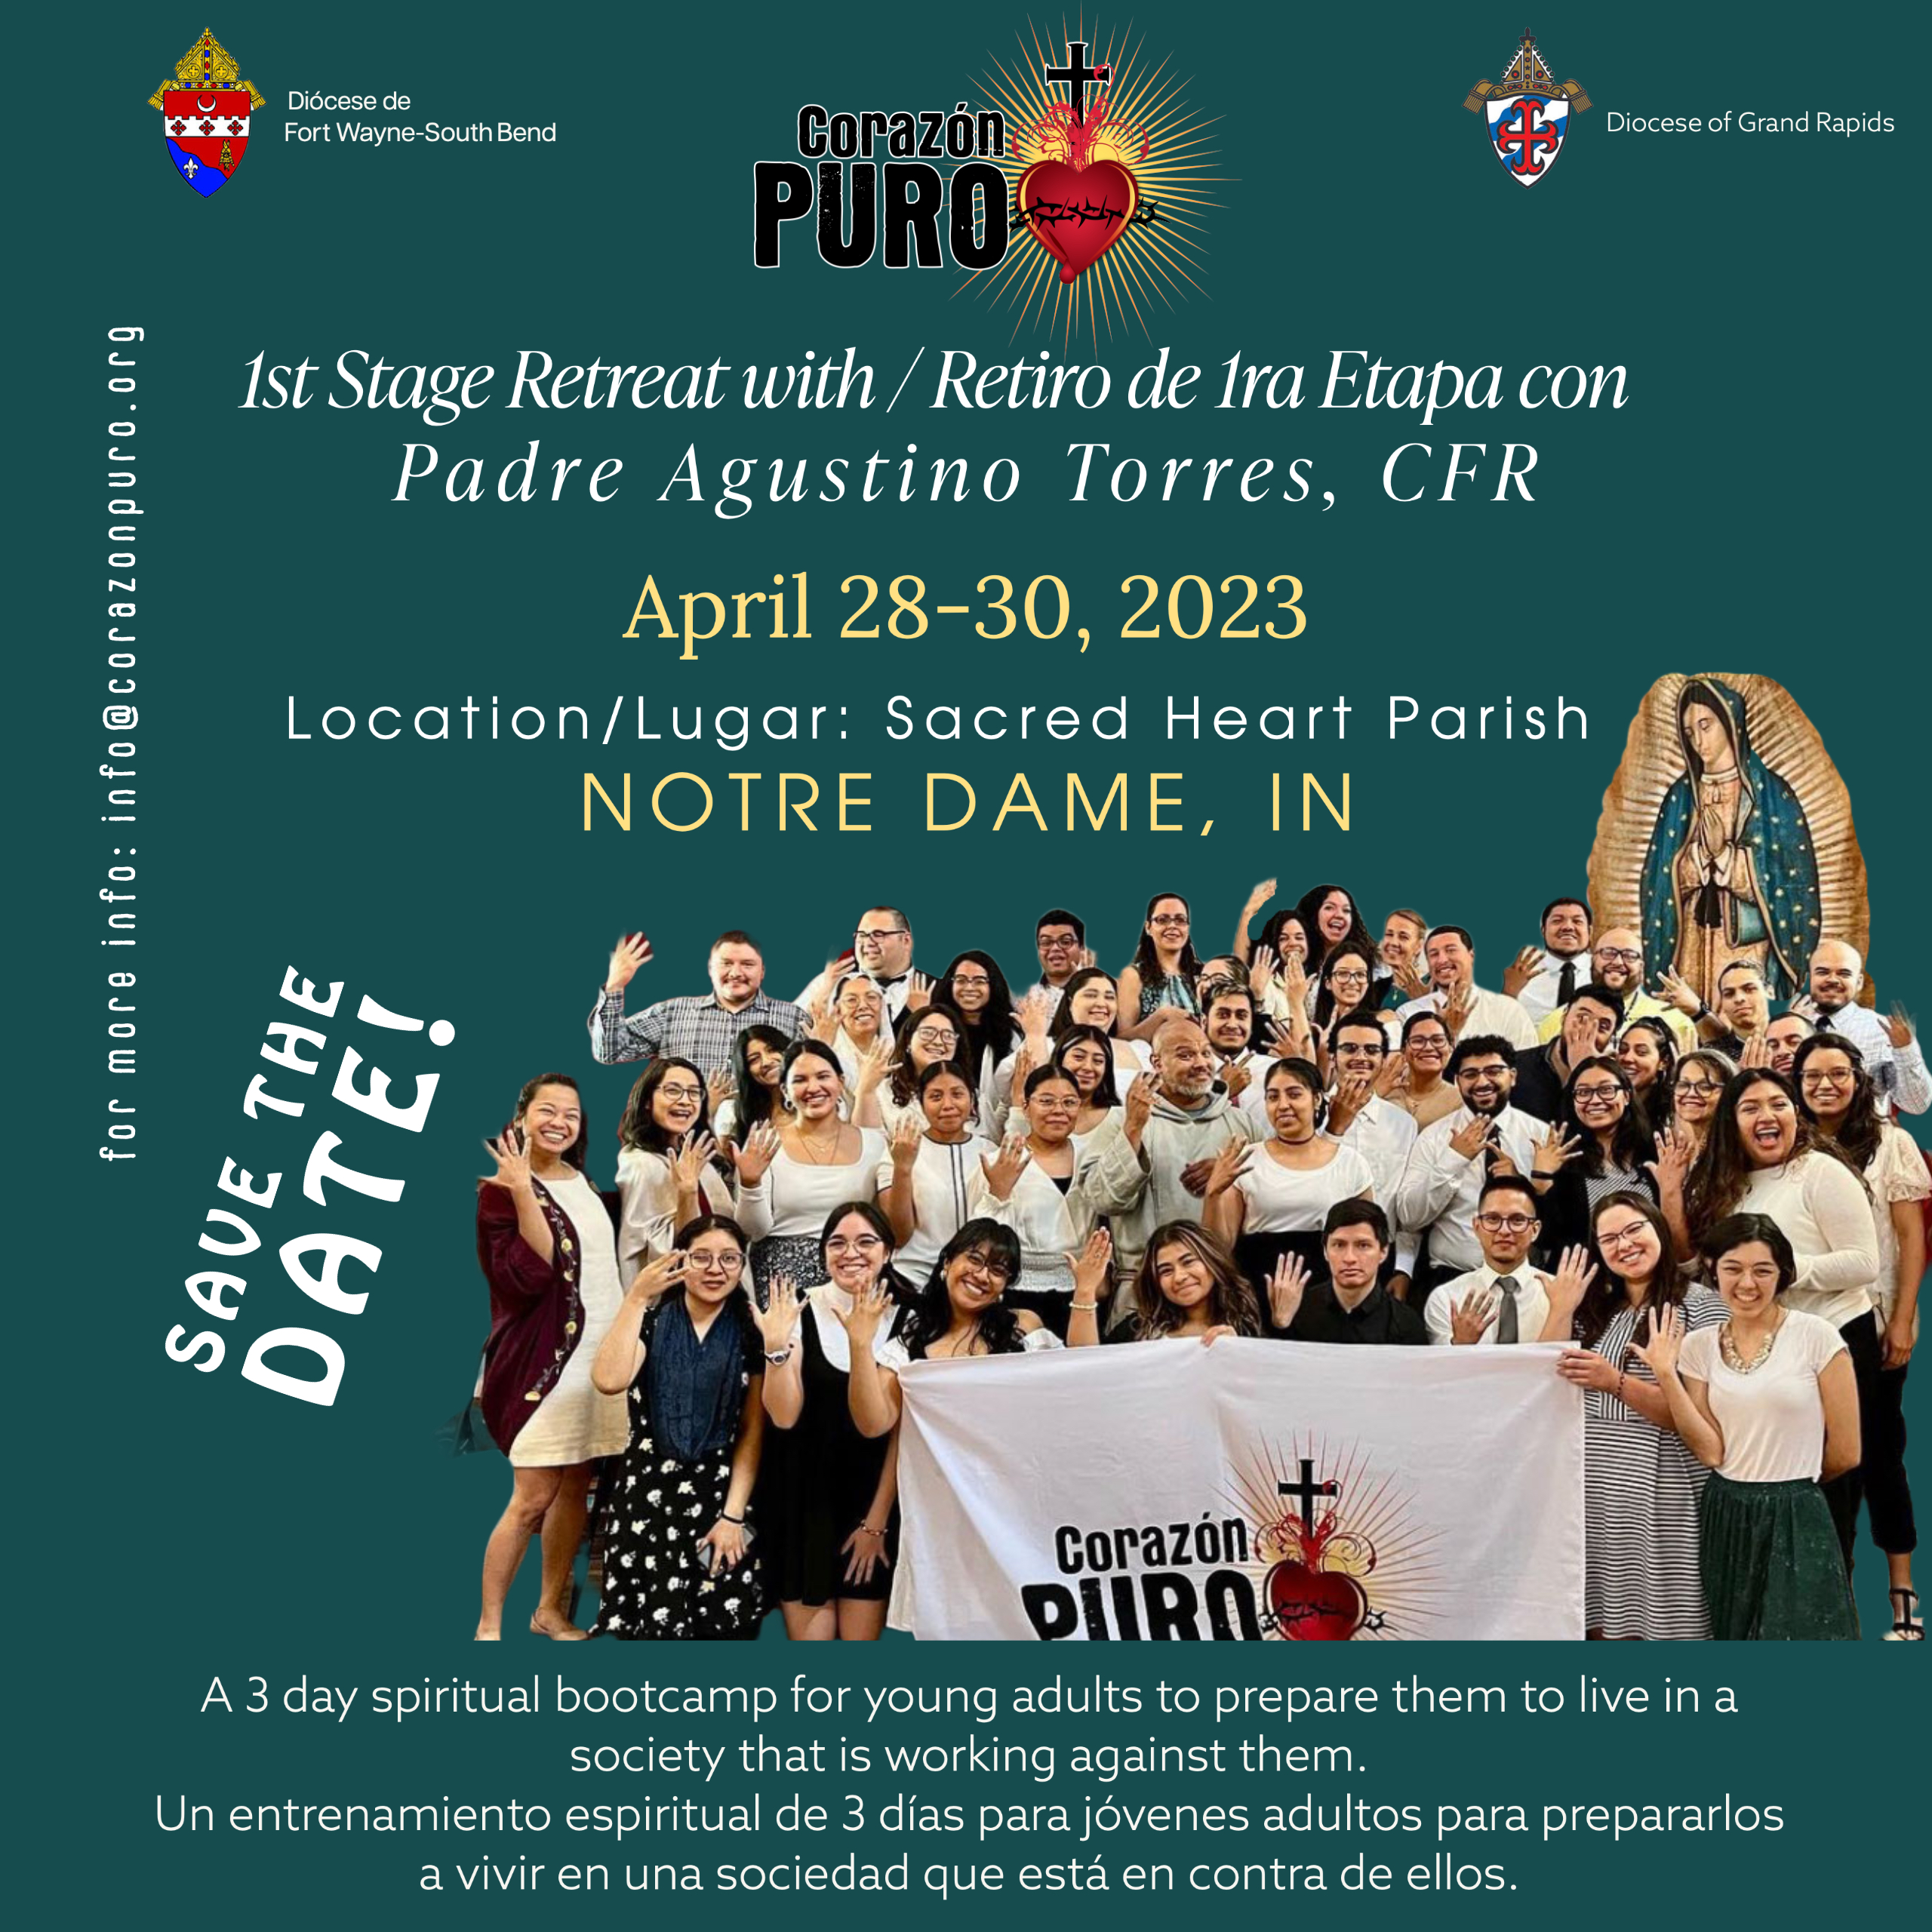 Flyer for Corazon Puro, Pure Heart, Retreat for Hispanic Young Adults